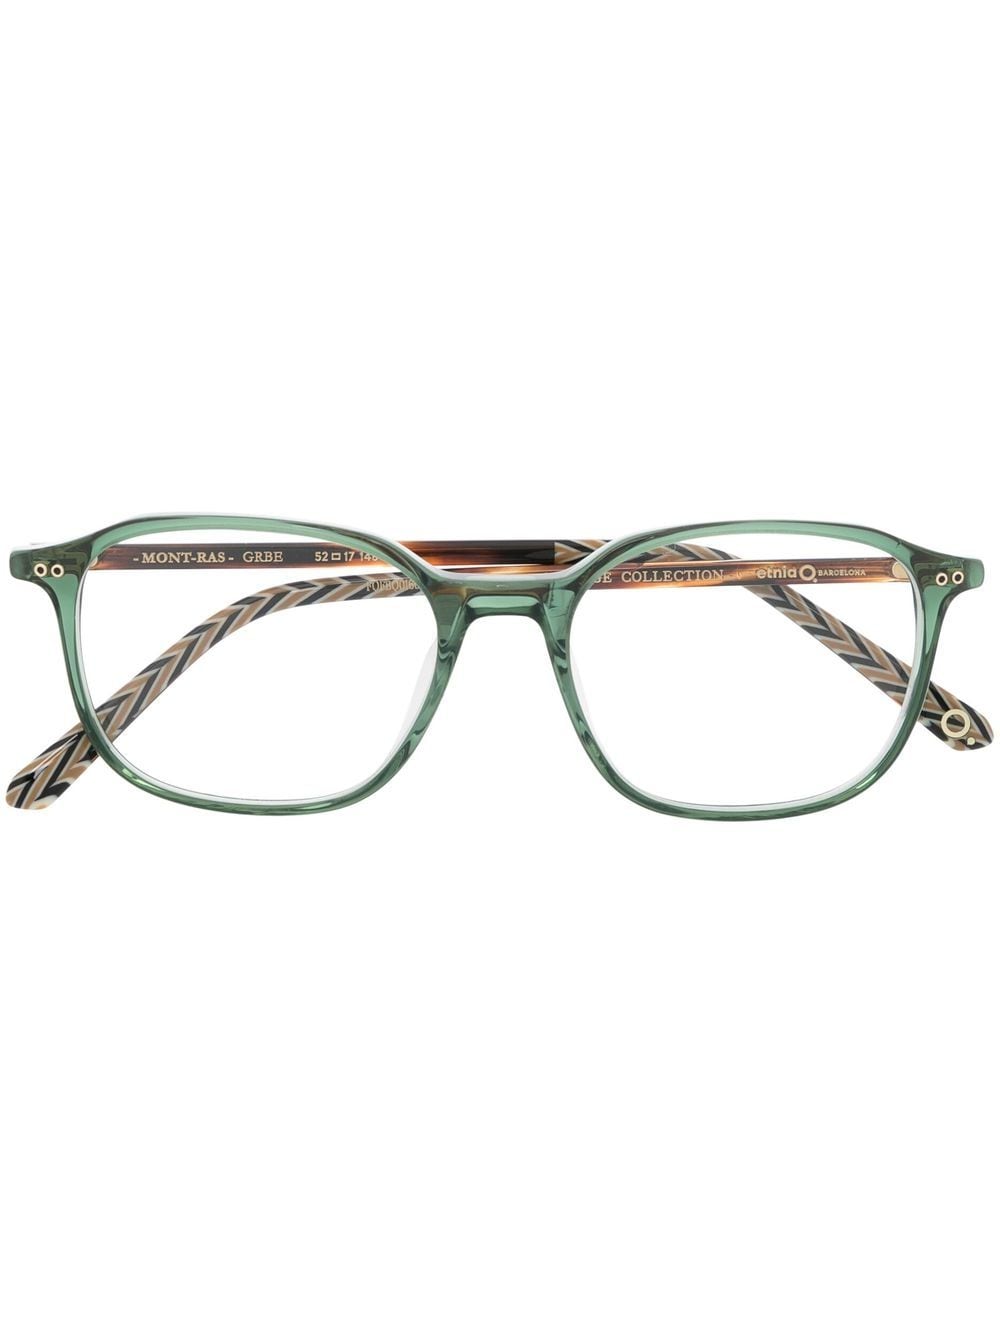 Montras two-tone glasses